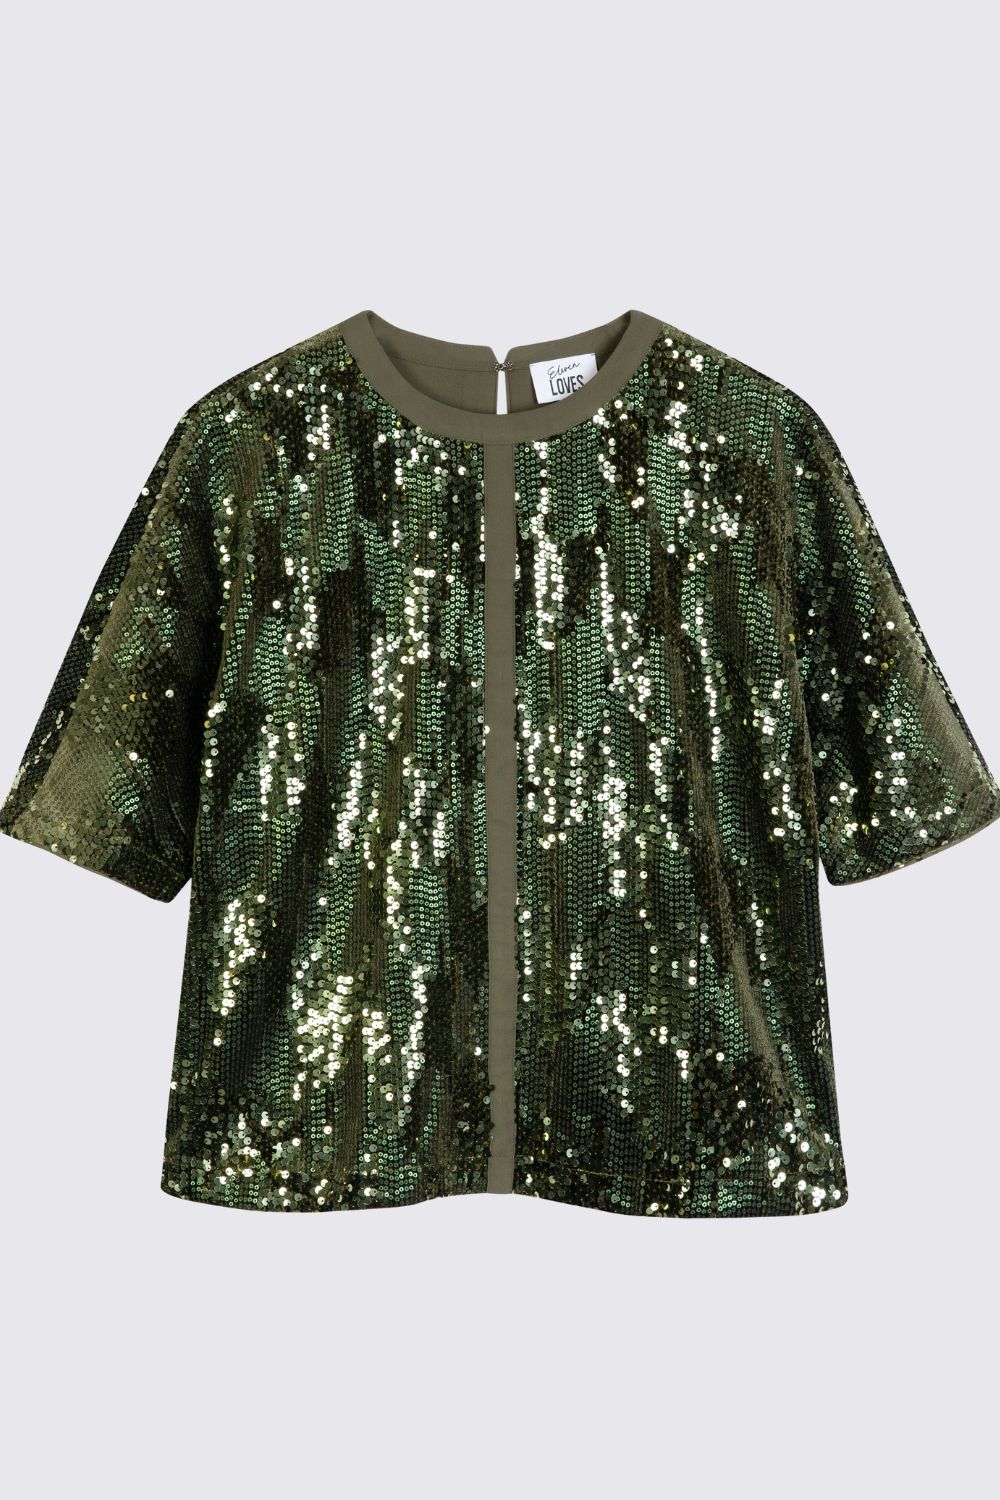 Elevenloves sequin shirt sadie green sequin t-shirt sustainable recycled sequin top ellen loves eleven loves 11loves